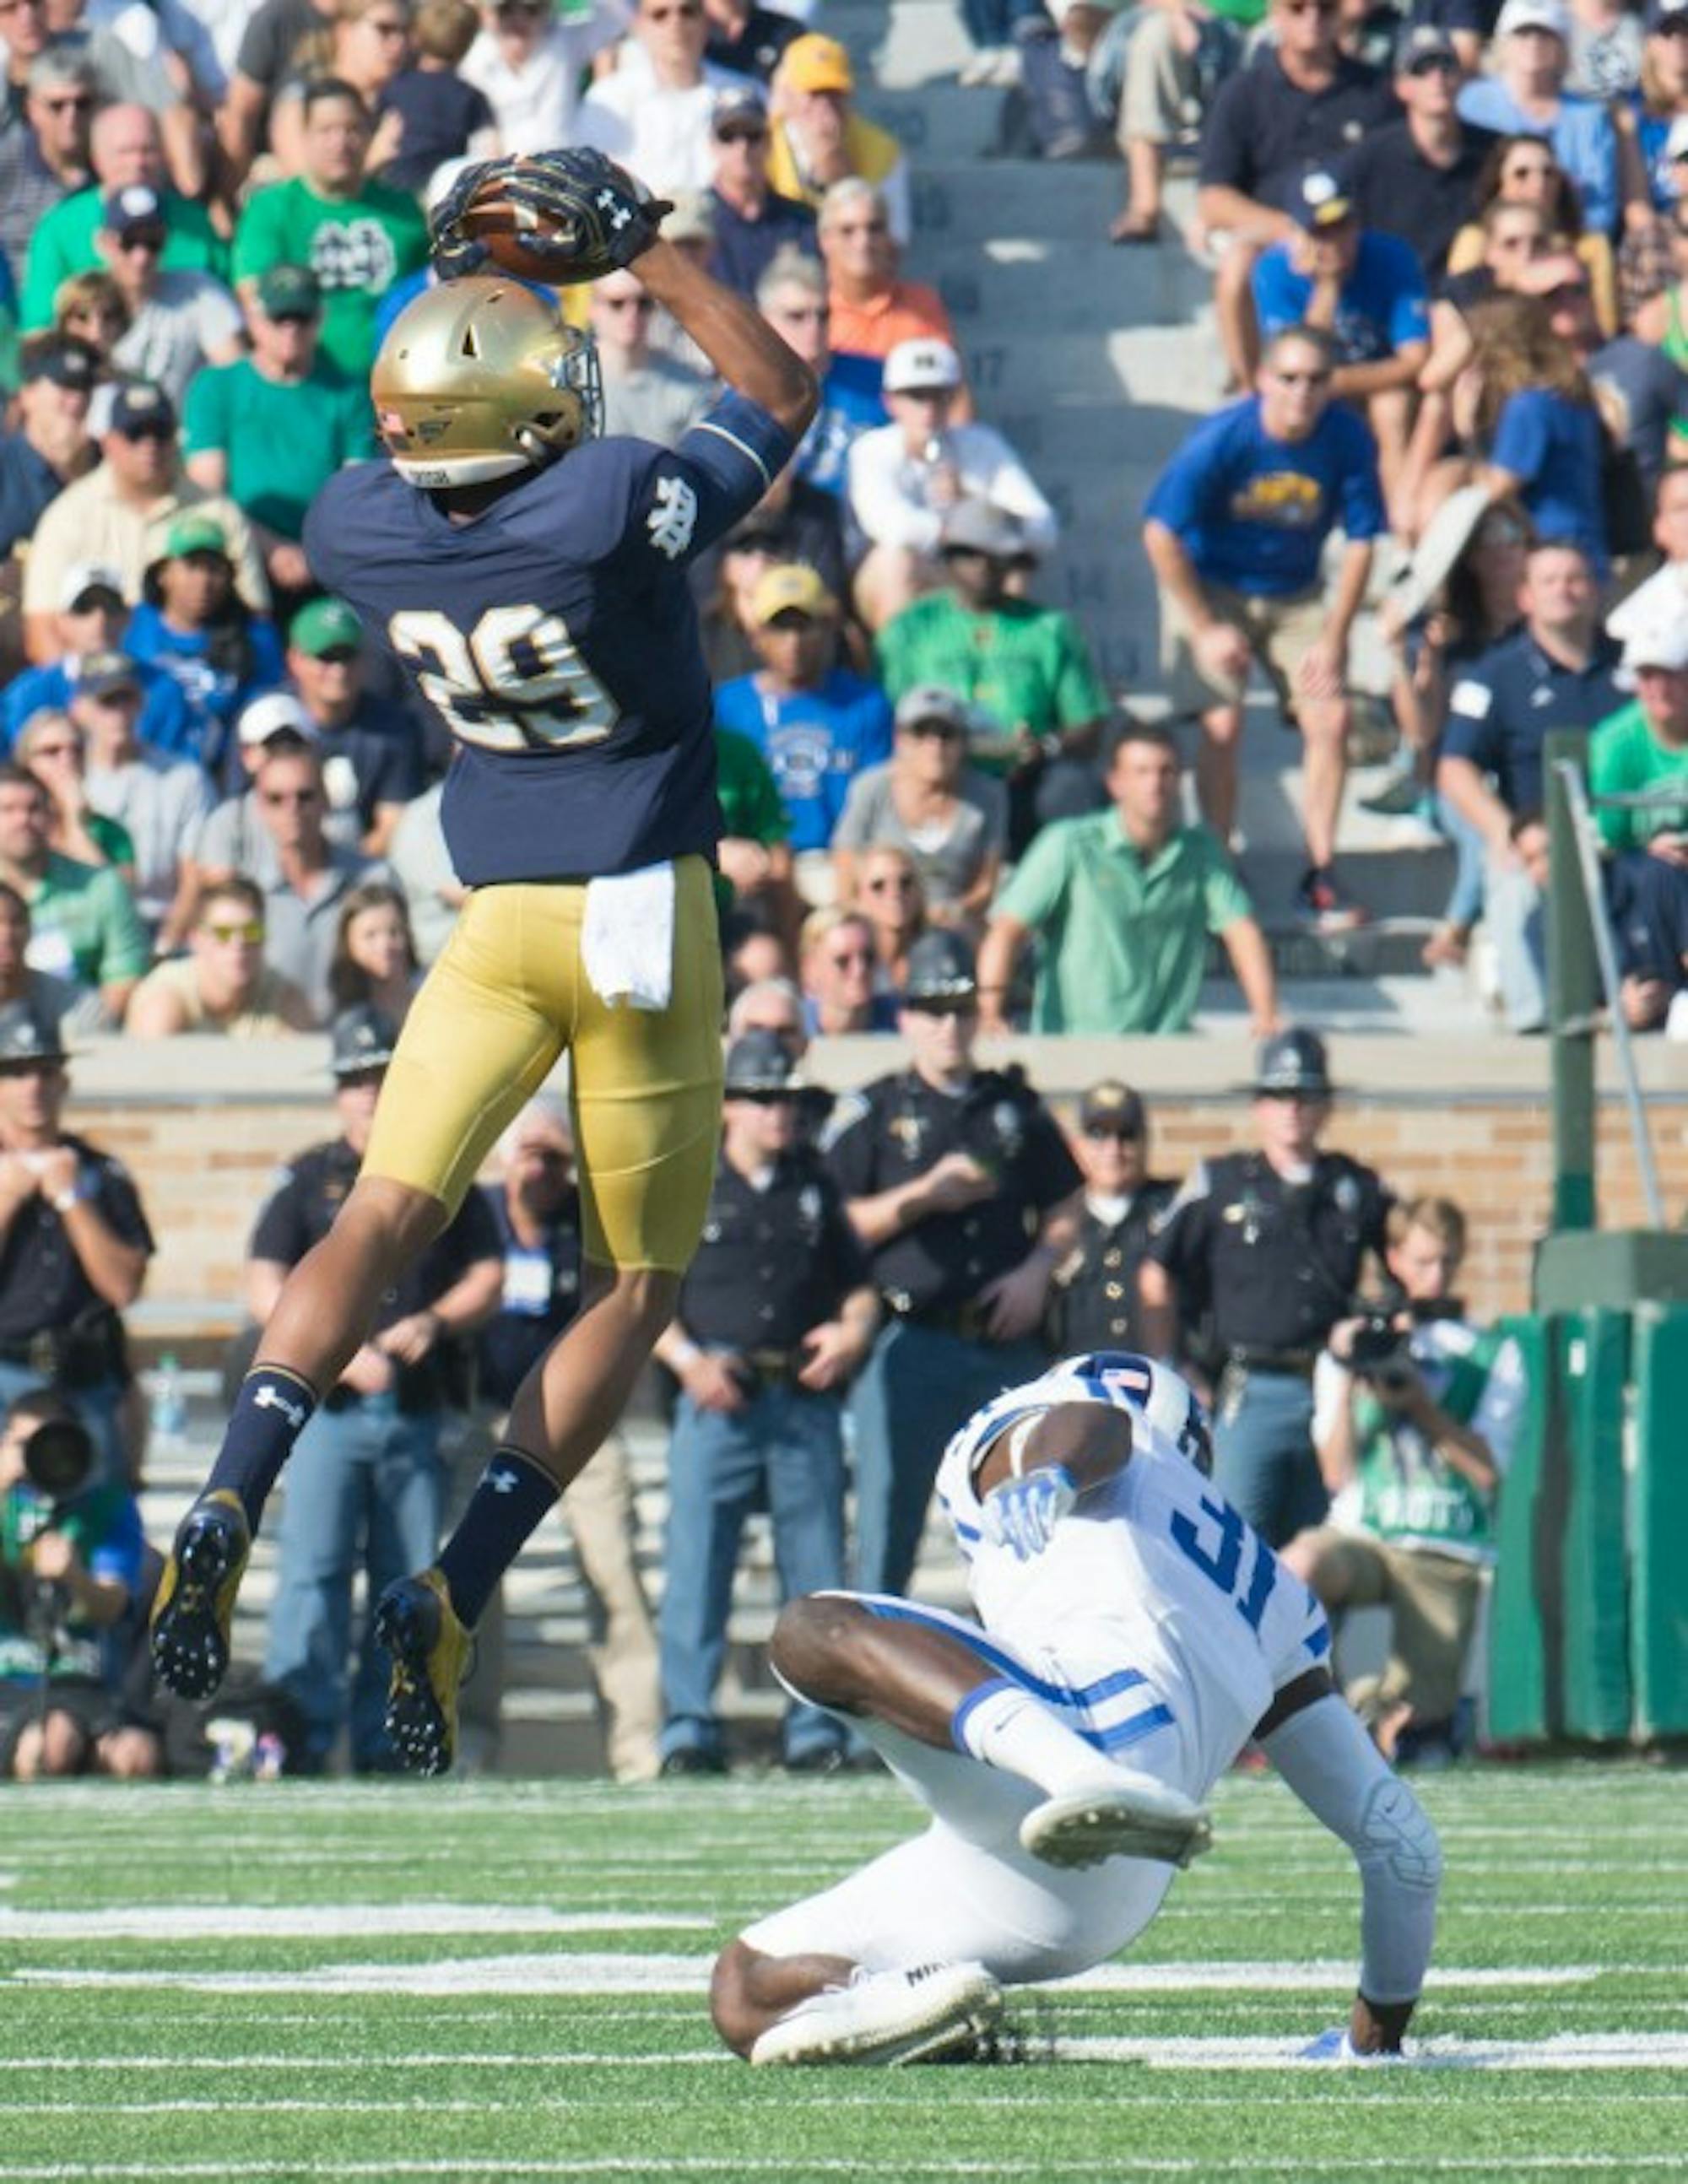 Irish freshman receiver Kevin Stepherson elevates to make a catch during Notre Dame’s 38-35 loss to Duke on Saturday at Notre Dame Stadium.